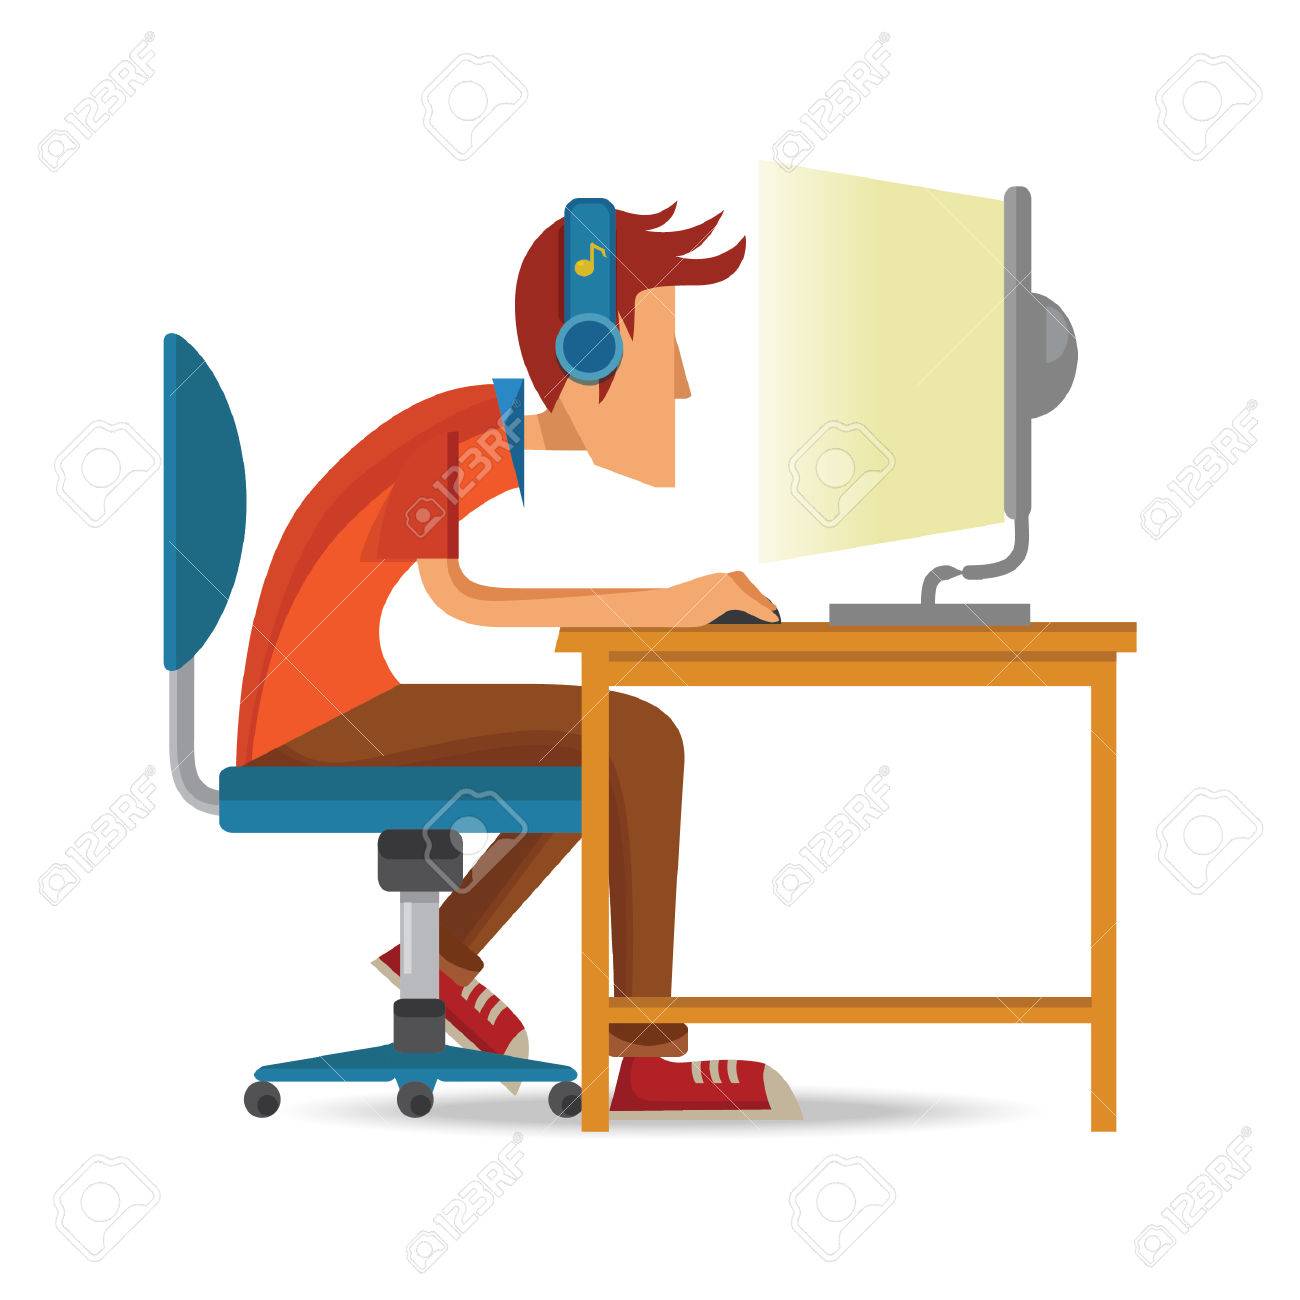 Man working on computer clipart 4 » Clipart Station.